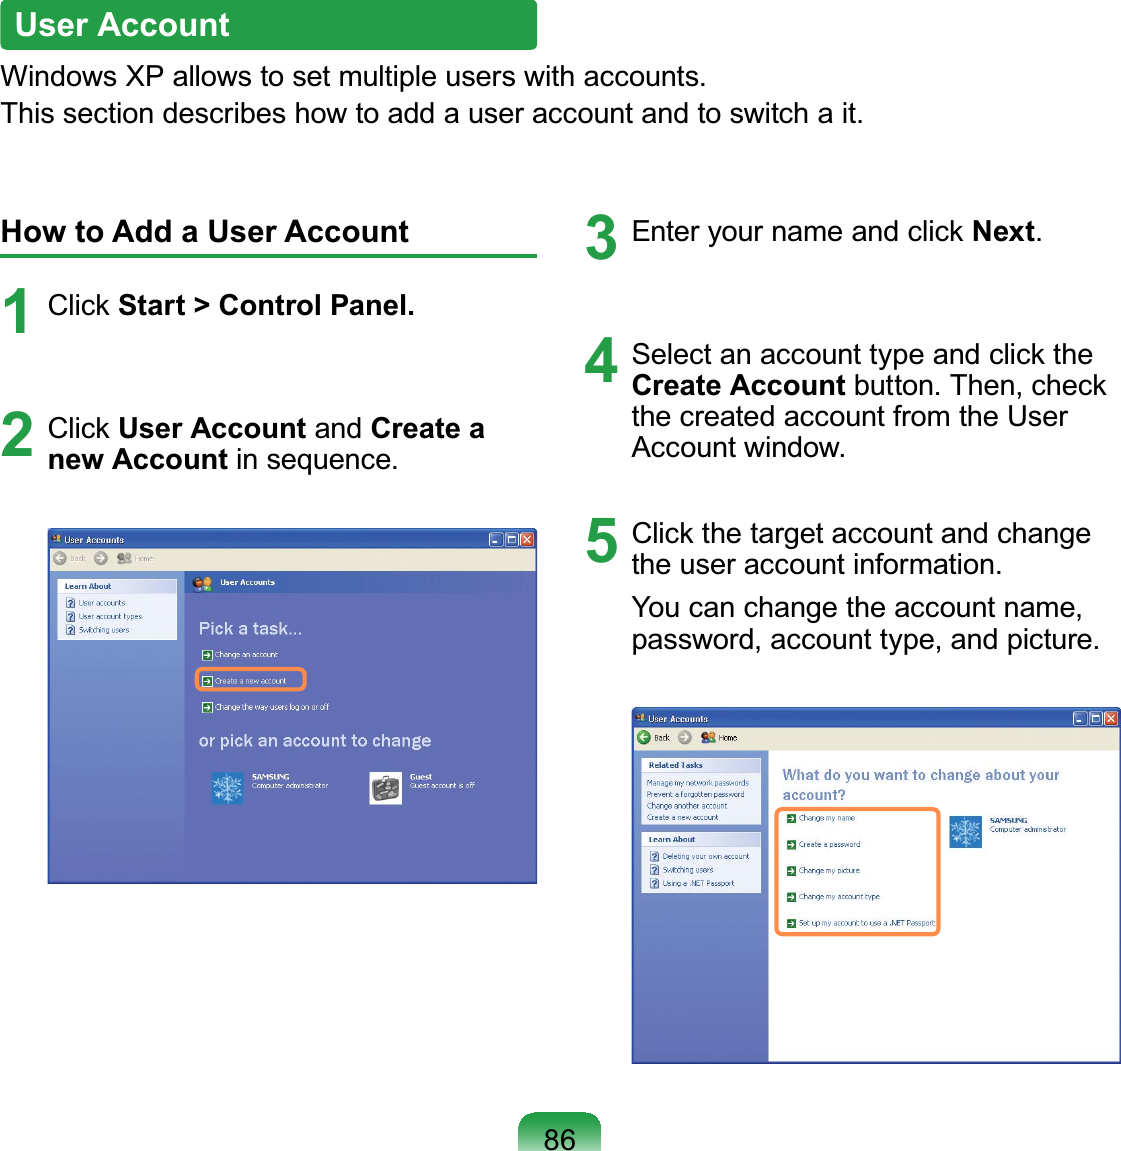 86User AccountWindowsXPallowstosetmultipleuserswithaccounts.Thissectiondescribeshowtoaddauseraccountandtoswitchait.How to Add a User Account1 &amp;OLFNStart &gt; Control Panel.2 &amp;OLFNUser Account and Create a new Account in sequence.3 (QWHU\RXUQDPHDQGFOLFNNext.4 6HOHFWDQDFFRXQWW\SHDQGFOLFNWKHCreate AccountEXWWRQ7KHQFKHFNthe created account from the UserAccount window.5 &amp;OLFNWKHWDUJHWDFFRXQWDQGFKDQJHthe user account information.You can change the account name,password, account type, and picture.